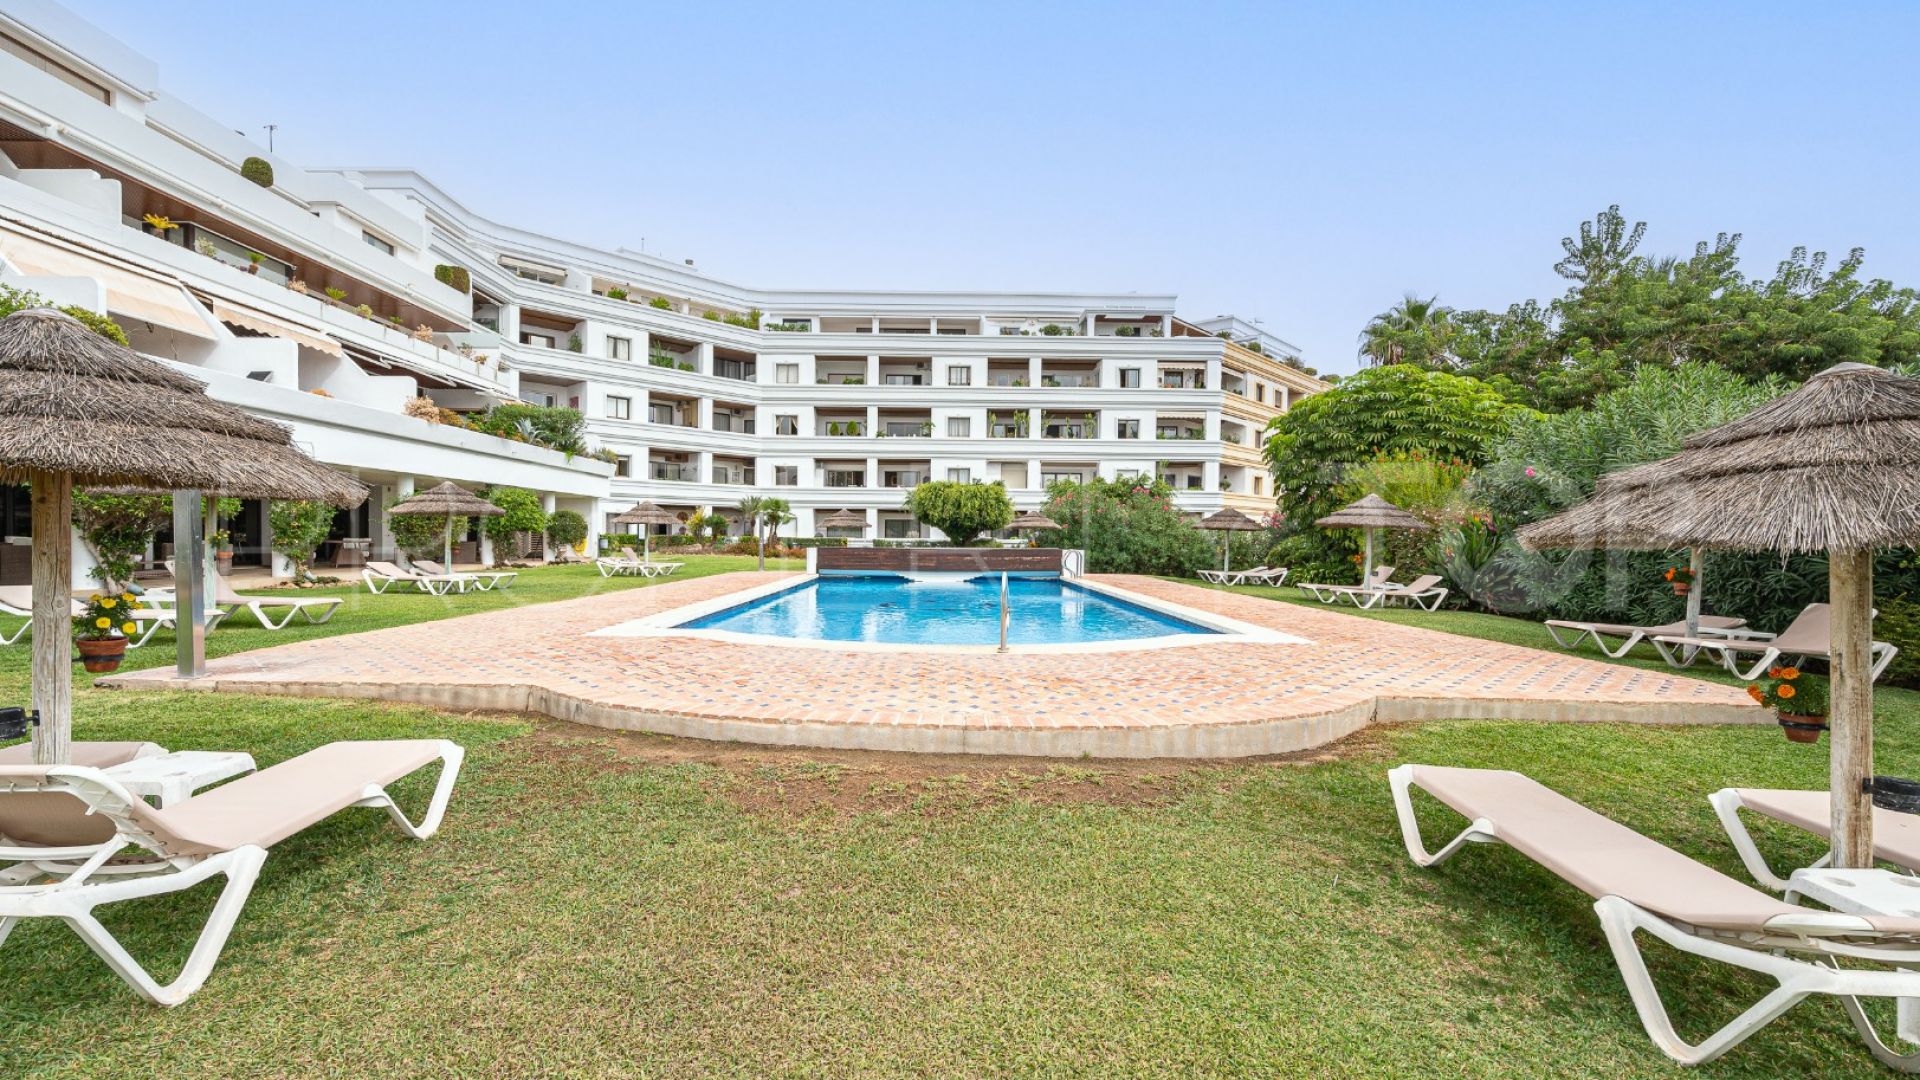 For sale ground floor apartment with 3 bedrooms in Hotel del Golf